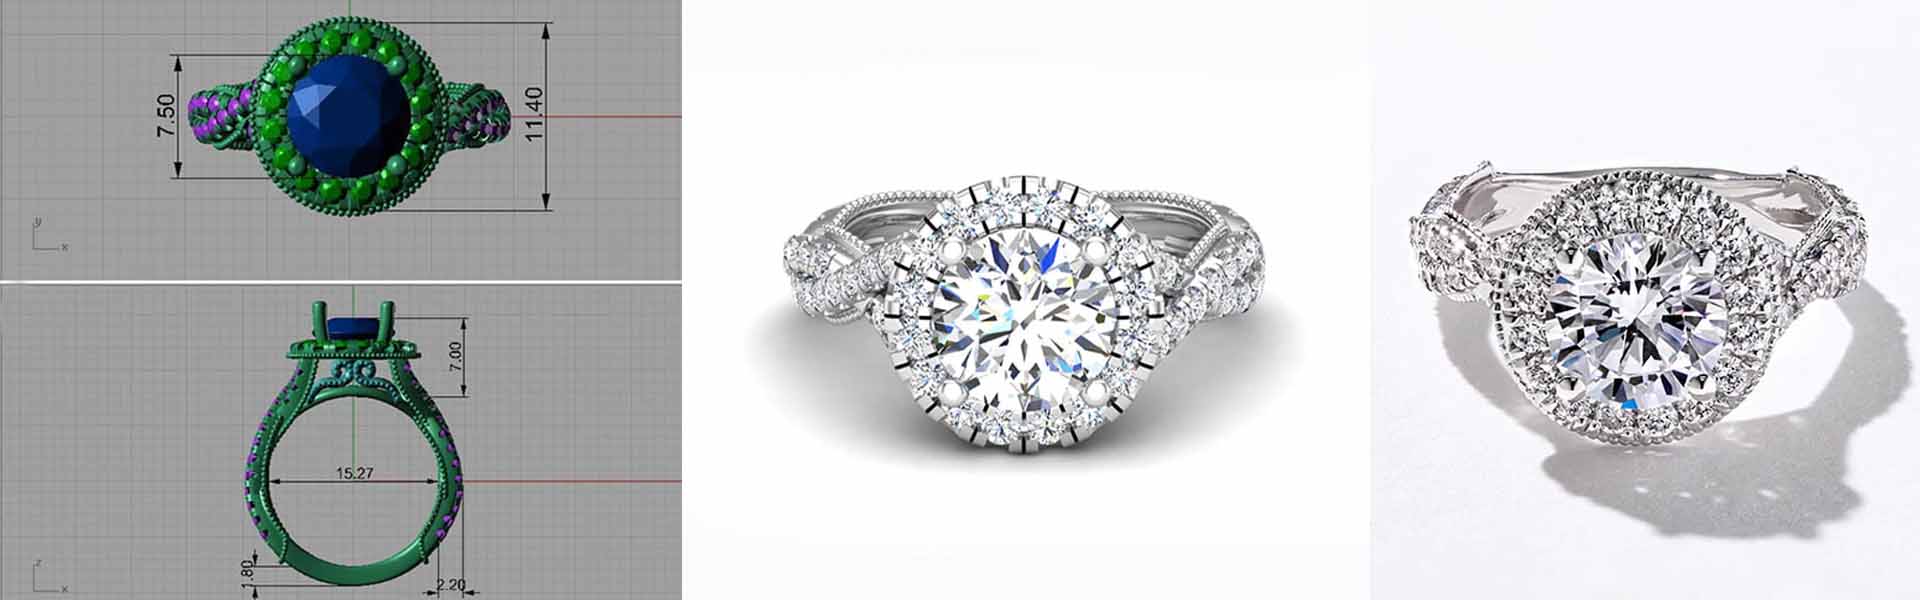 custom designed ring rendered concept of oval center stone with diamond accents